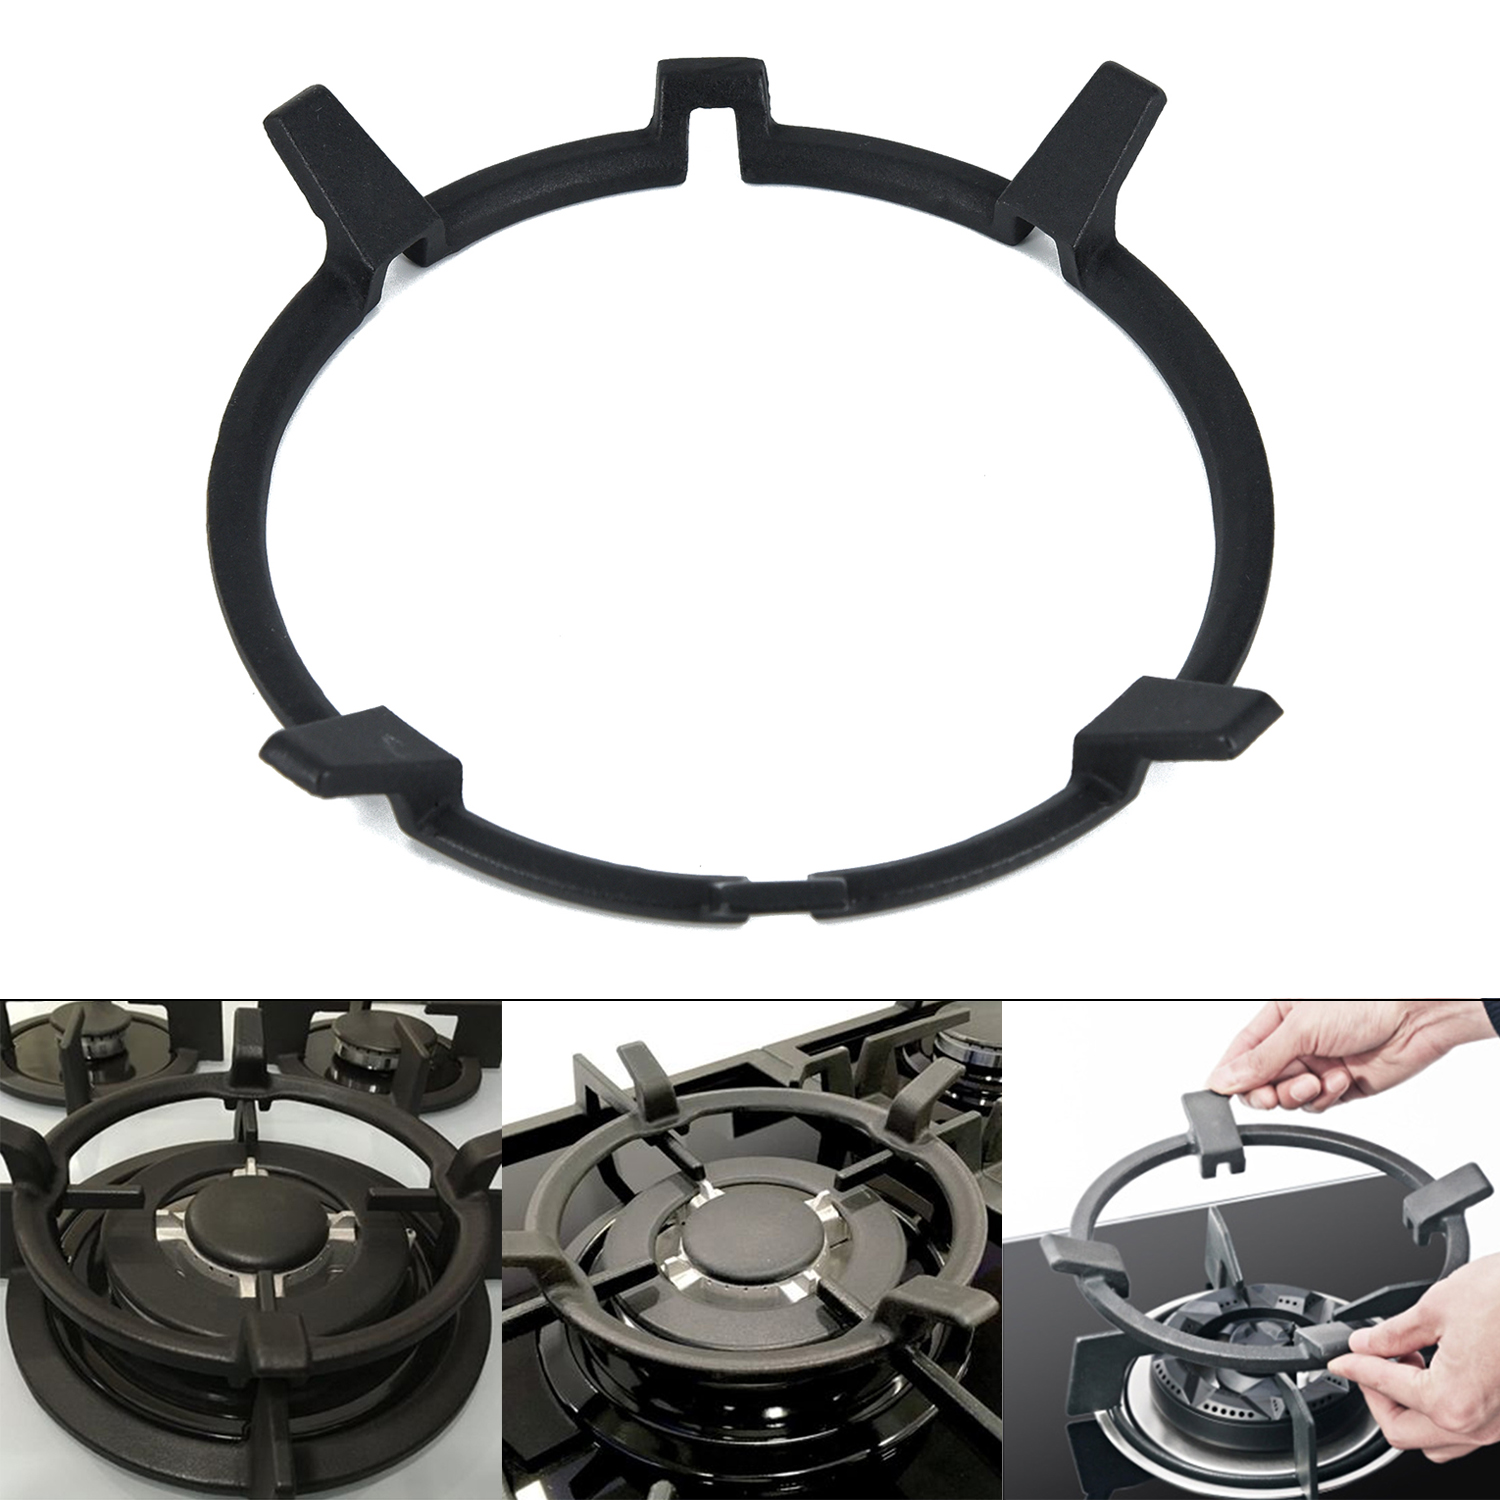 1 Piece Universal Cast Iron Wok Pan Support Rack Stand For Burners Gas Hobs Cookers Storage Holders Racks